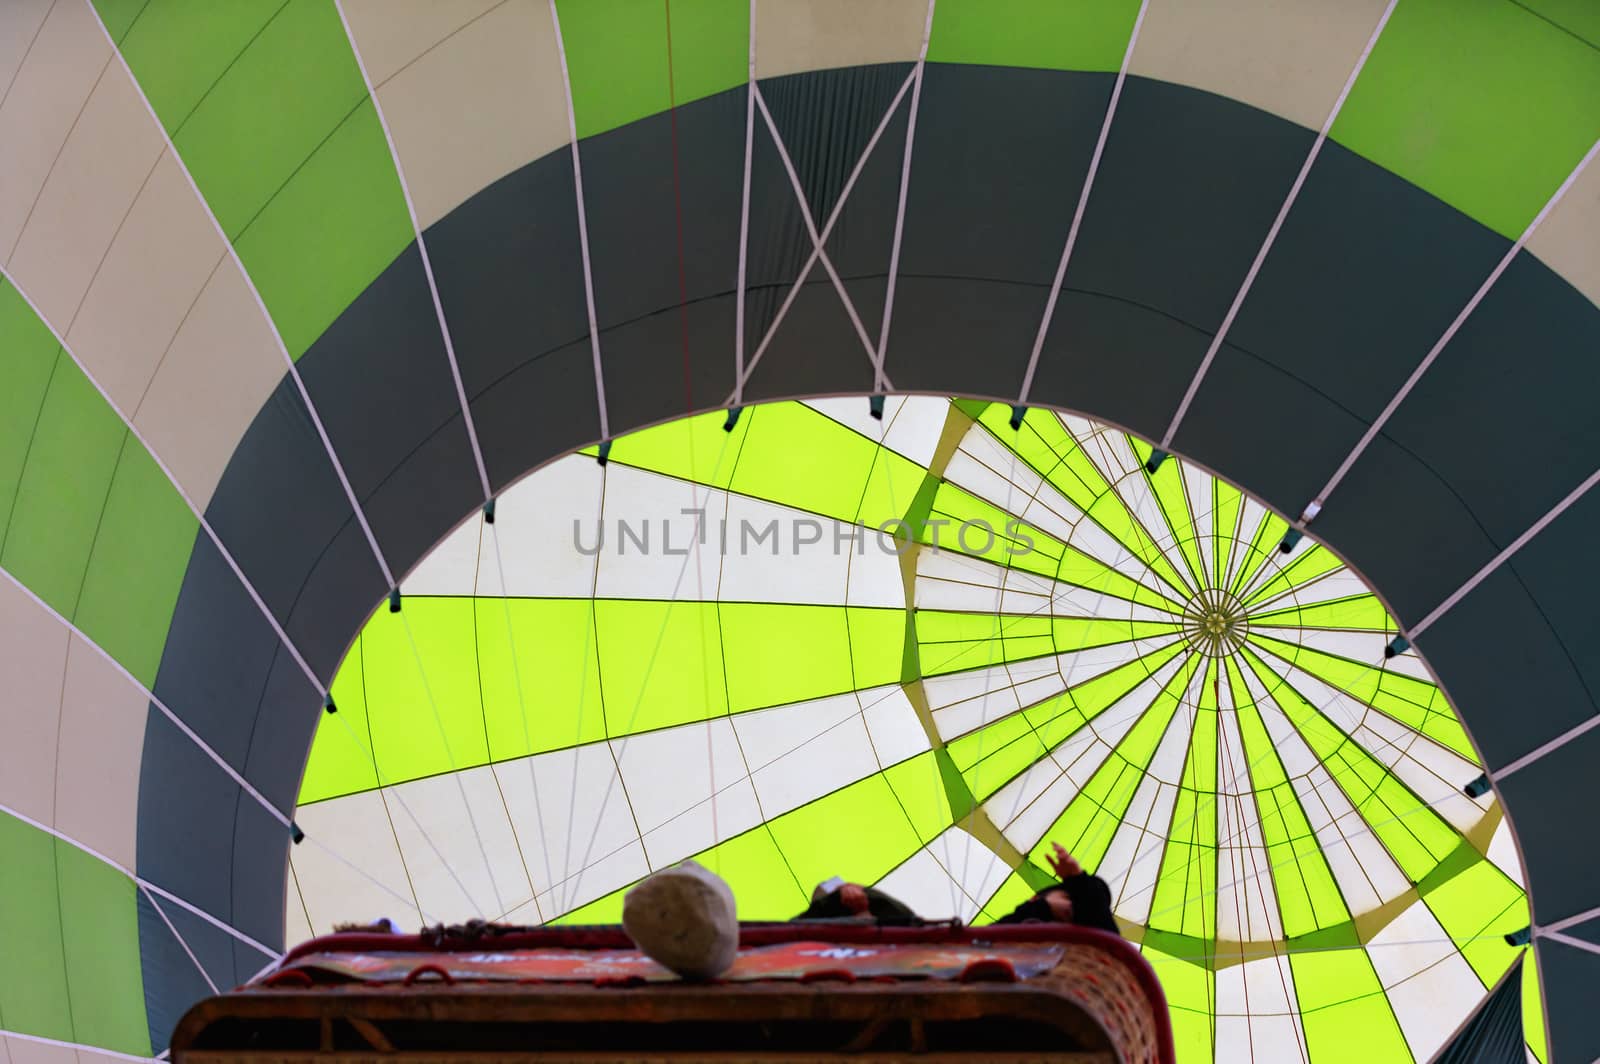 Radial grooves in the center of a bright dome of a white-green balloon that lifts people in a wicker basket.